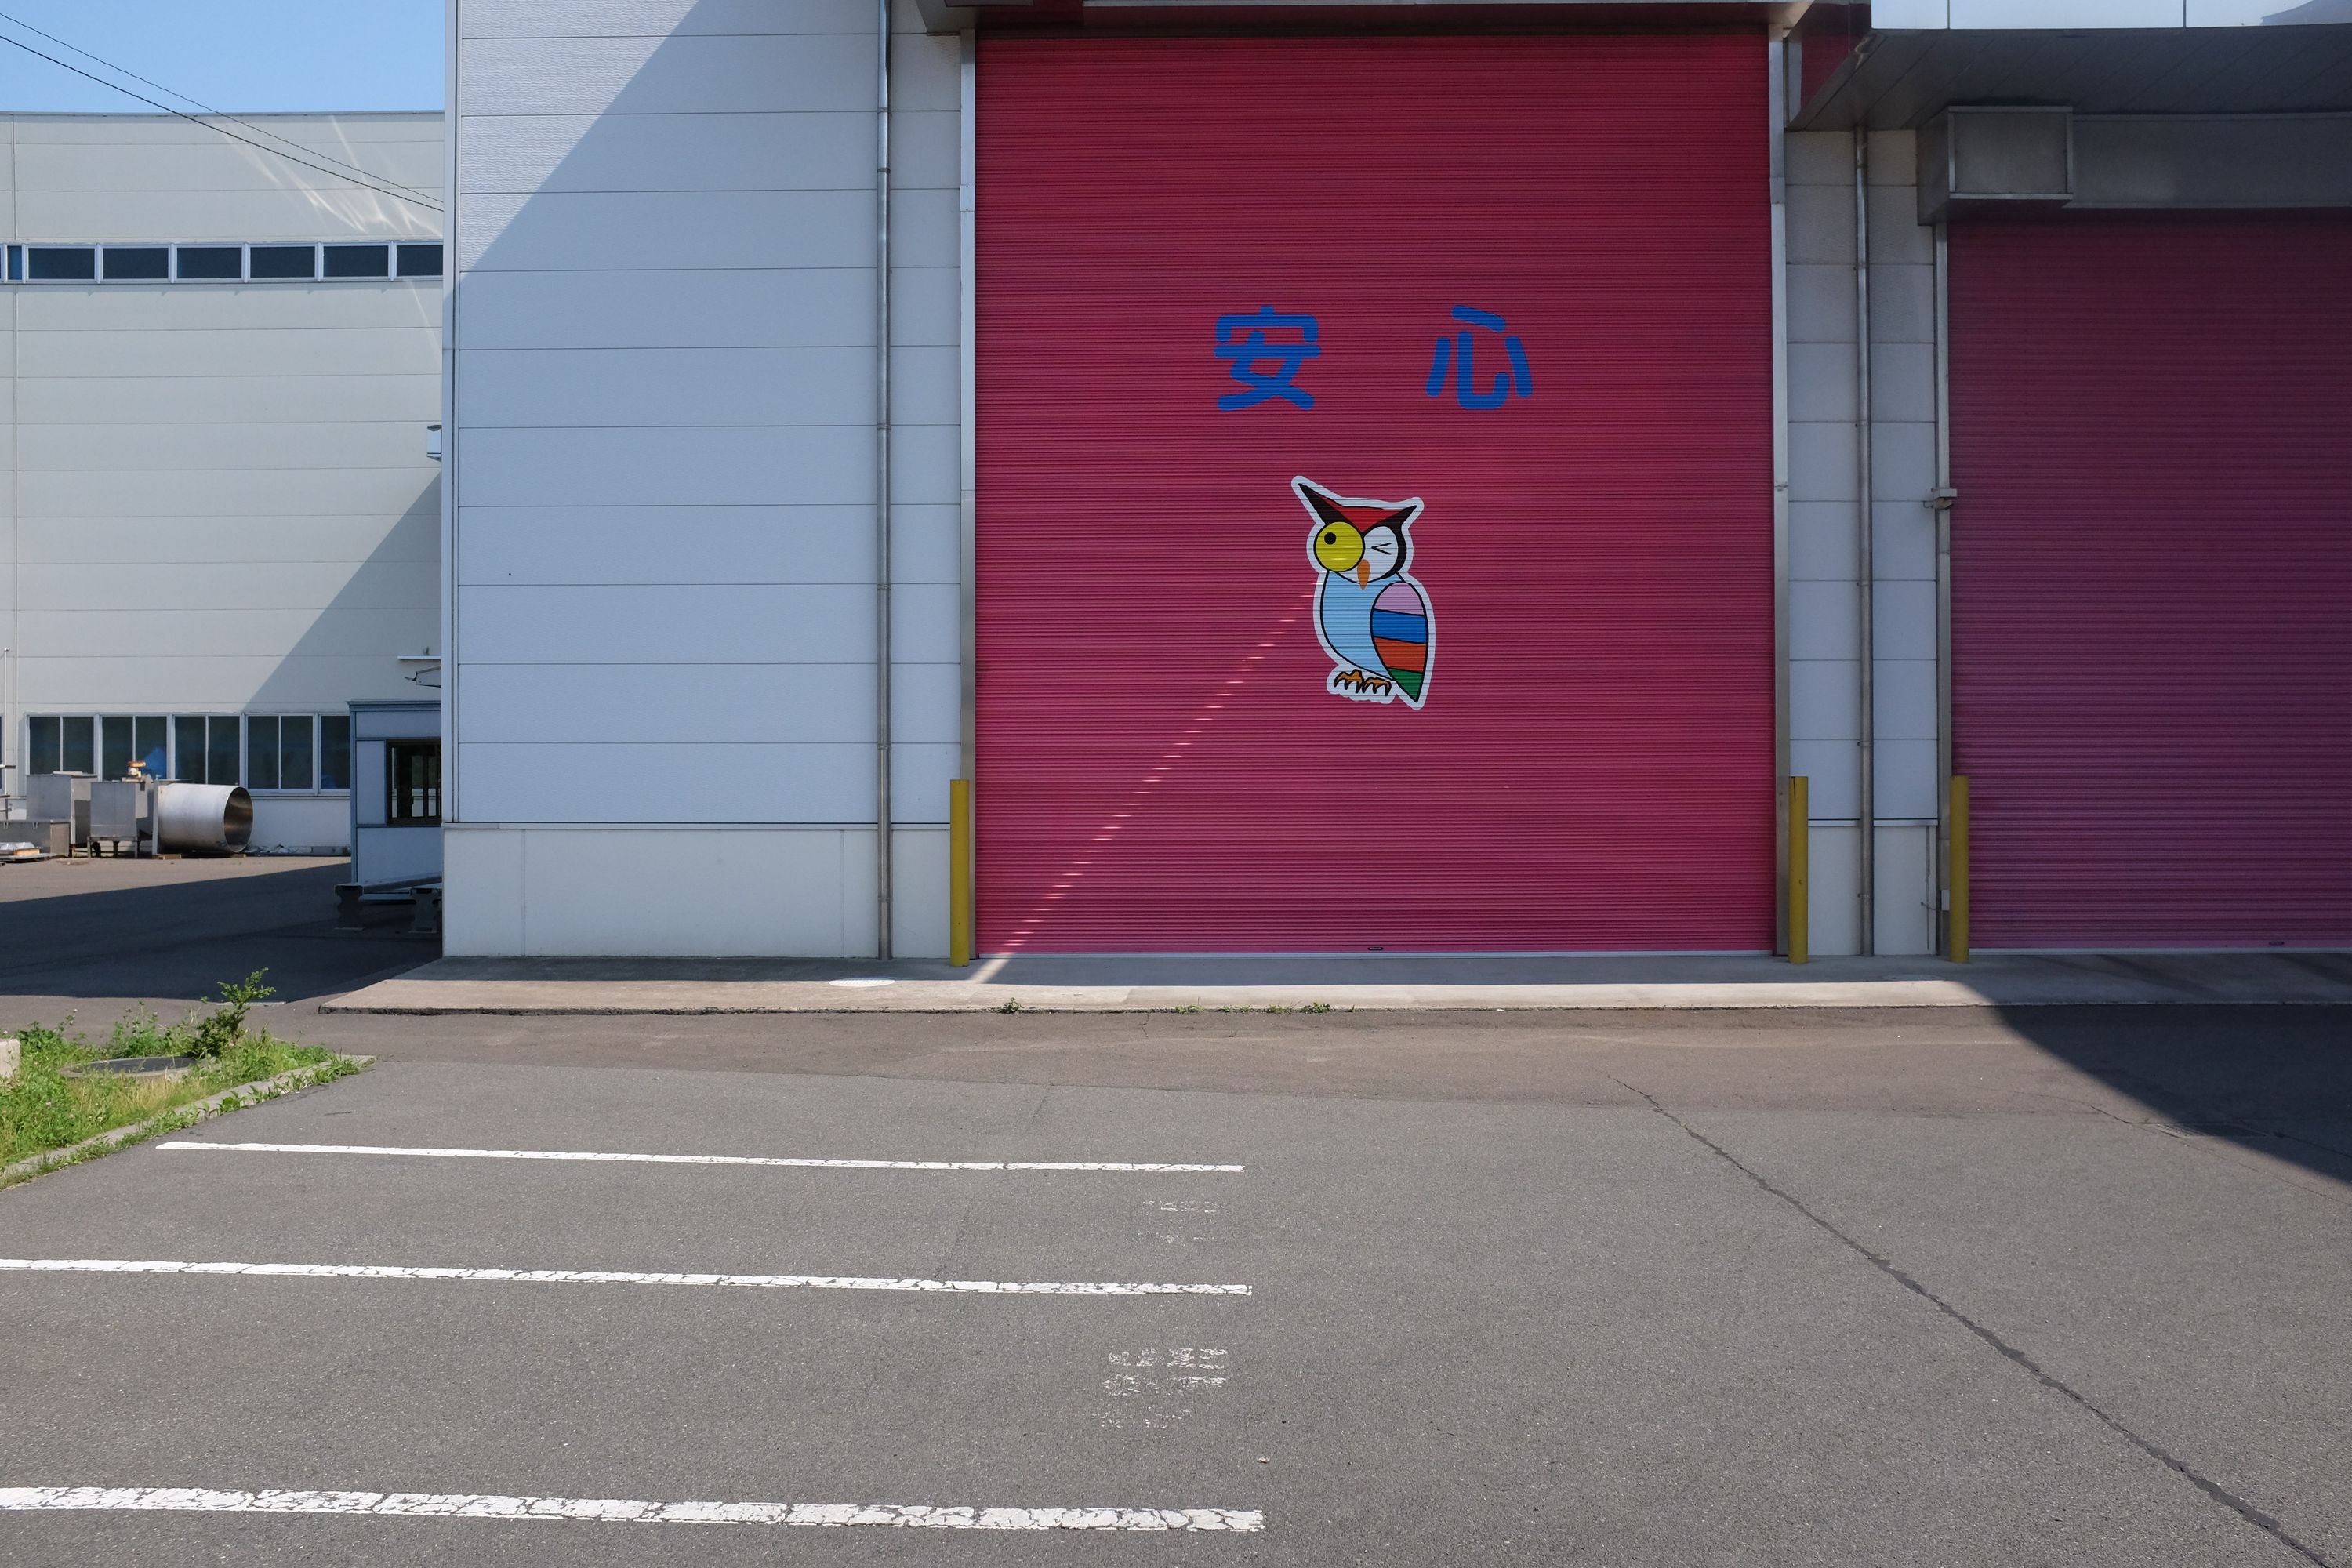 On a warehouse door marked with the word 安心, Japanese for peace of mind, a ray of light combines with the painting of an owl to make it appear that the light is coming from the owl’s bulging right eye.